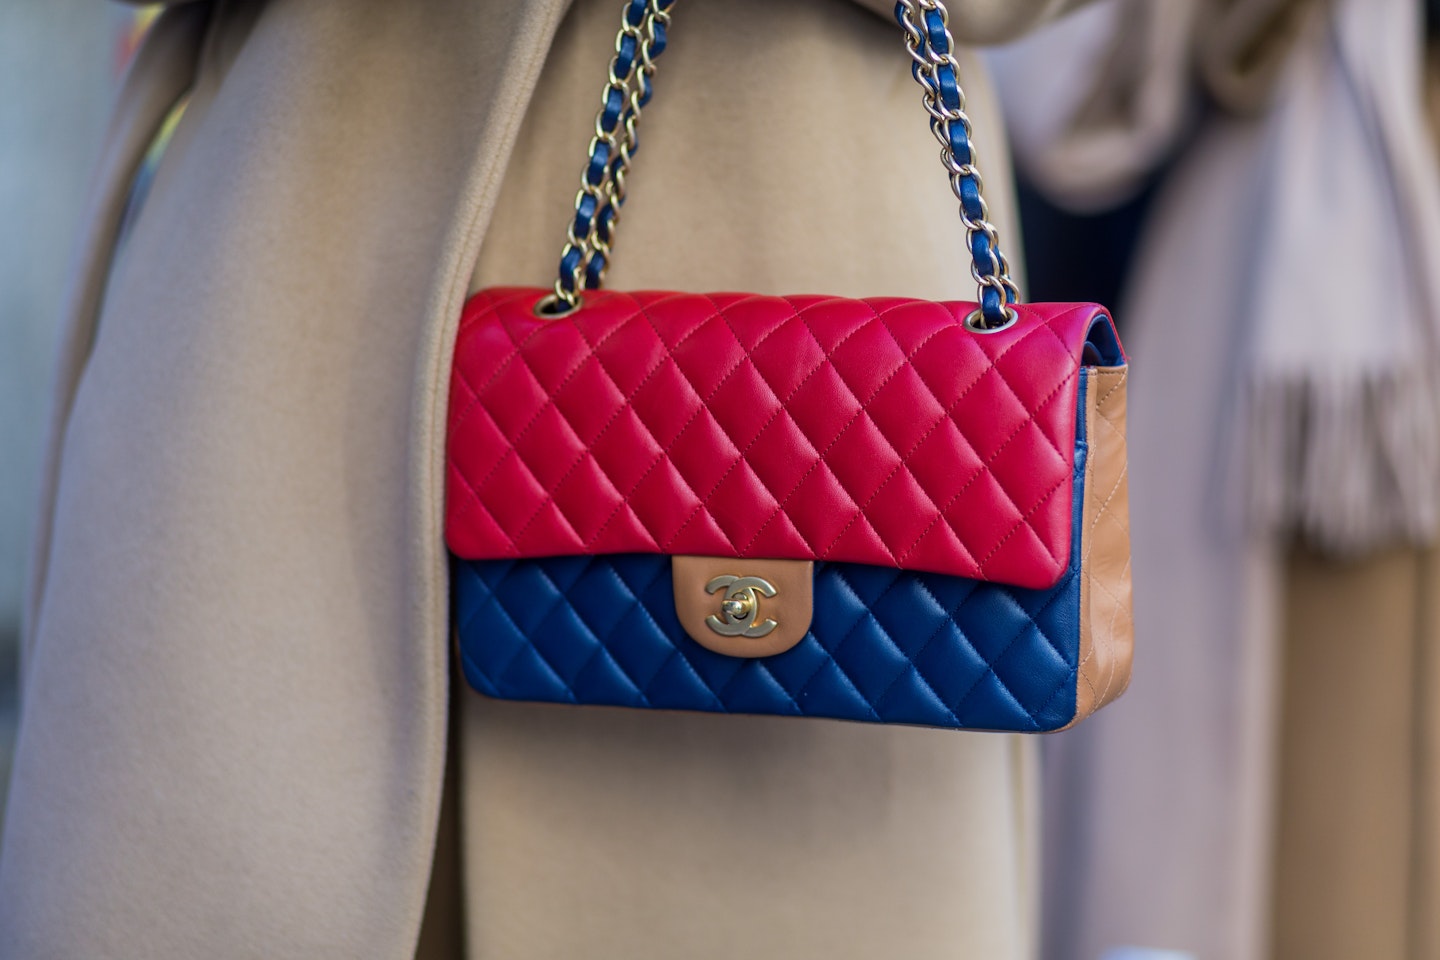 RANKED: Top 10 Best Chanel Bags with Xupes